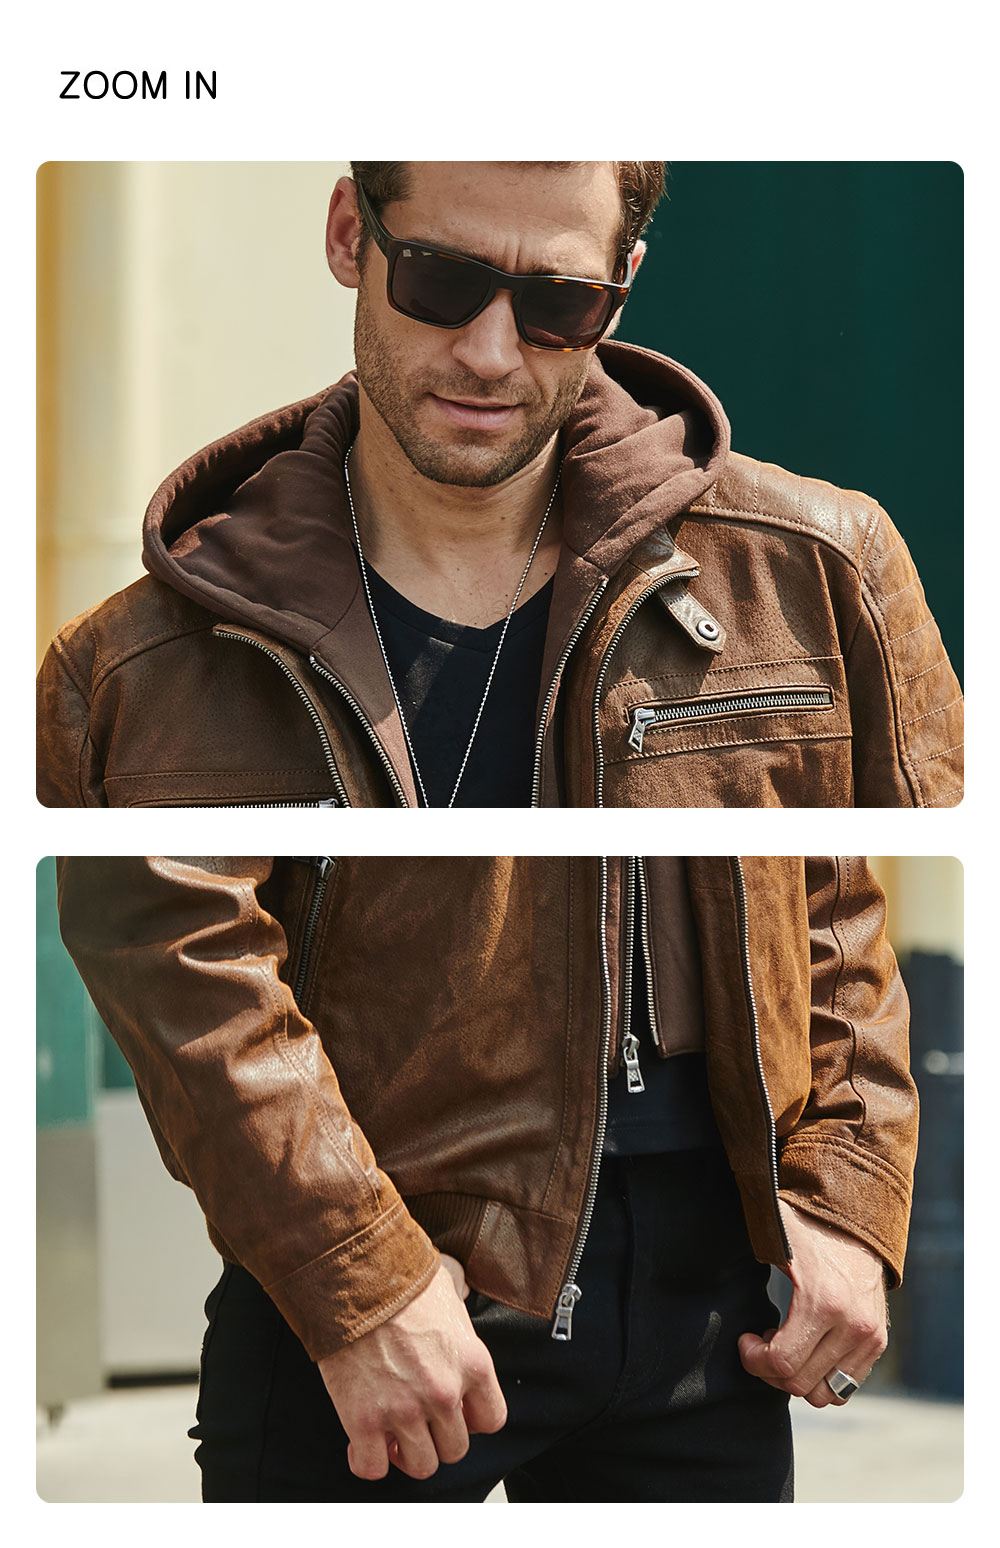 Men's Brown Motorcycle Leather Jacket with Detachable Hood  M2015-73B 100% polyester detachable hood motorcycle leather jacket| detachable hood motorcycle flavor leather jacket